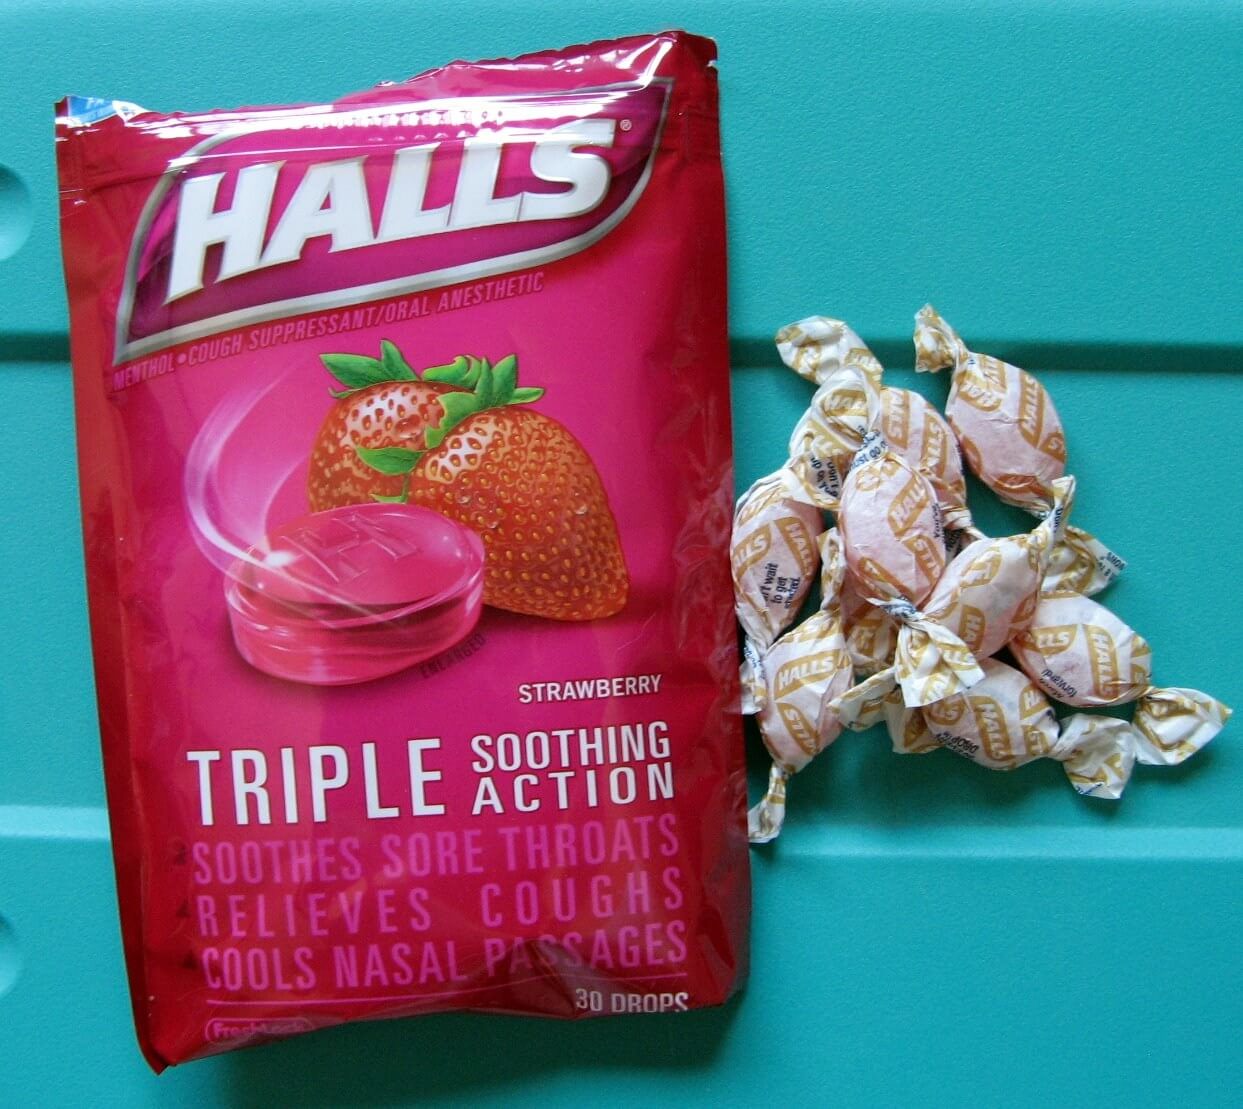 19-halls-strawberry-cough-drops-nutrition-facts